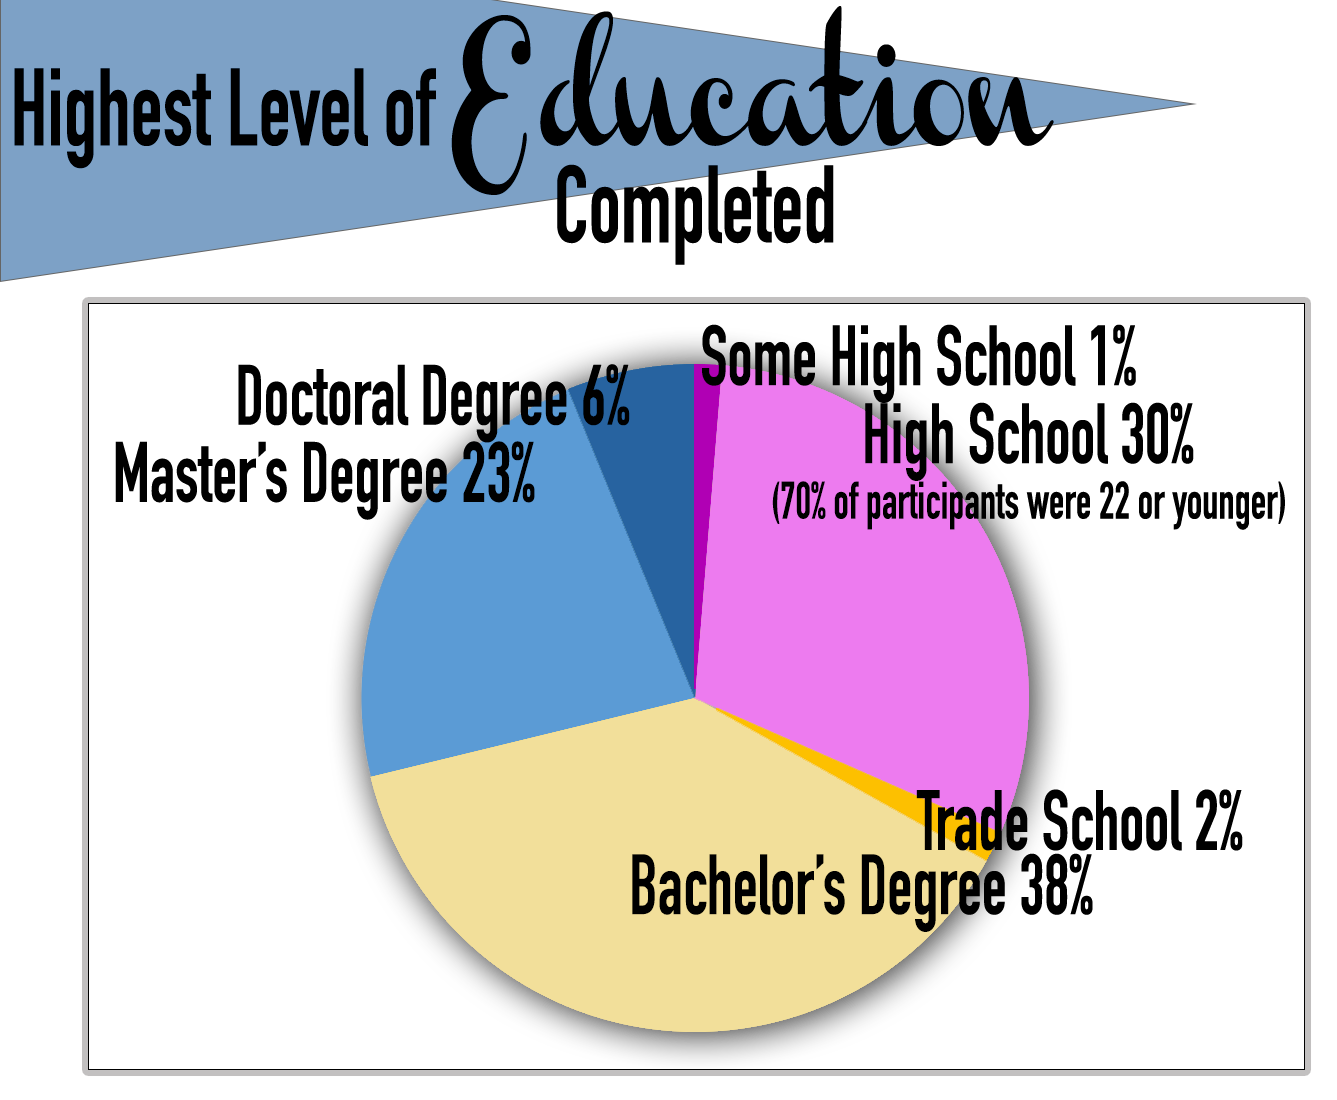 Highest Level of Education Completed: Some High School 1%, High School 30% (70% of participants were 22 or younger); Trade School 2%, Bachelor's Degree 38%; Master's Degree 23%, Doctoral Degree 6%.